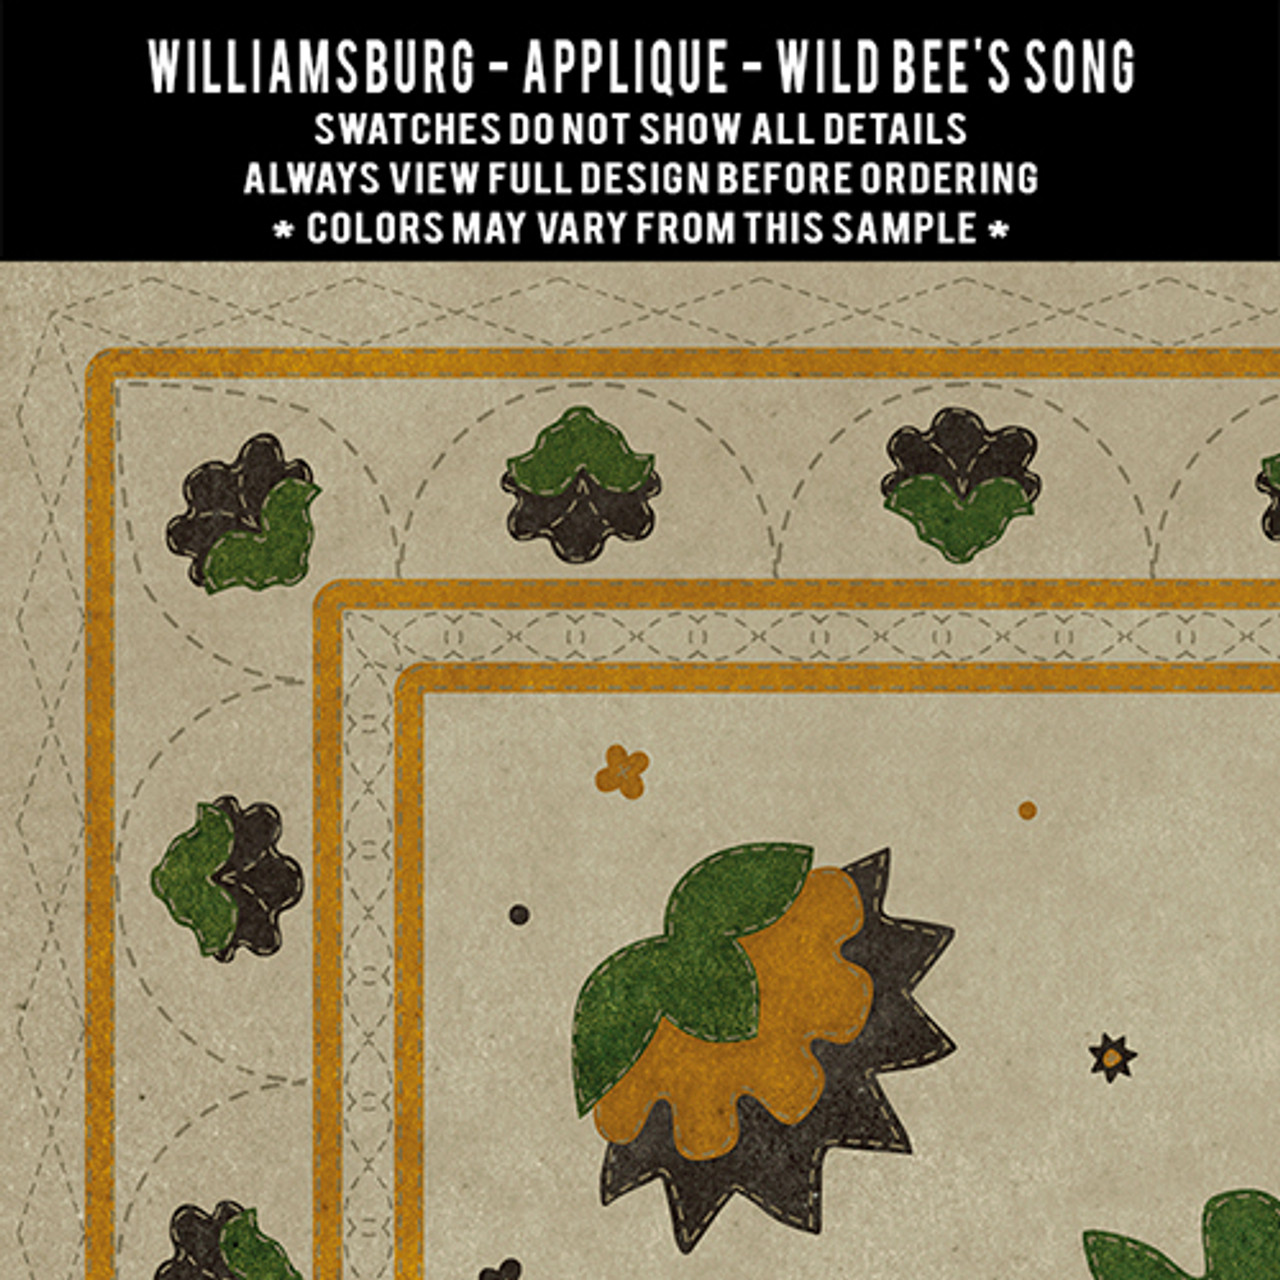 https://cdn11.bigcommerce.com/s-495cq/images/stencil/1280x1280/products/7165/30778/Williamsburg_Applique_Wild_Bees_Song__97869.1541709834.jpg?c=2